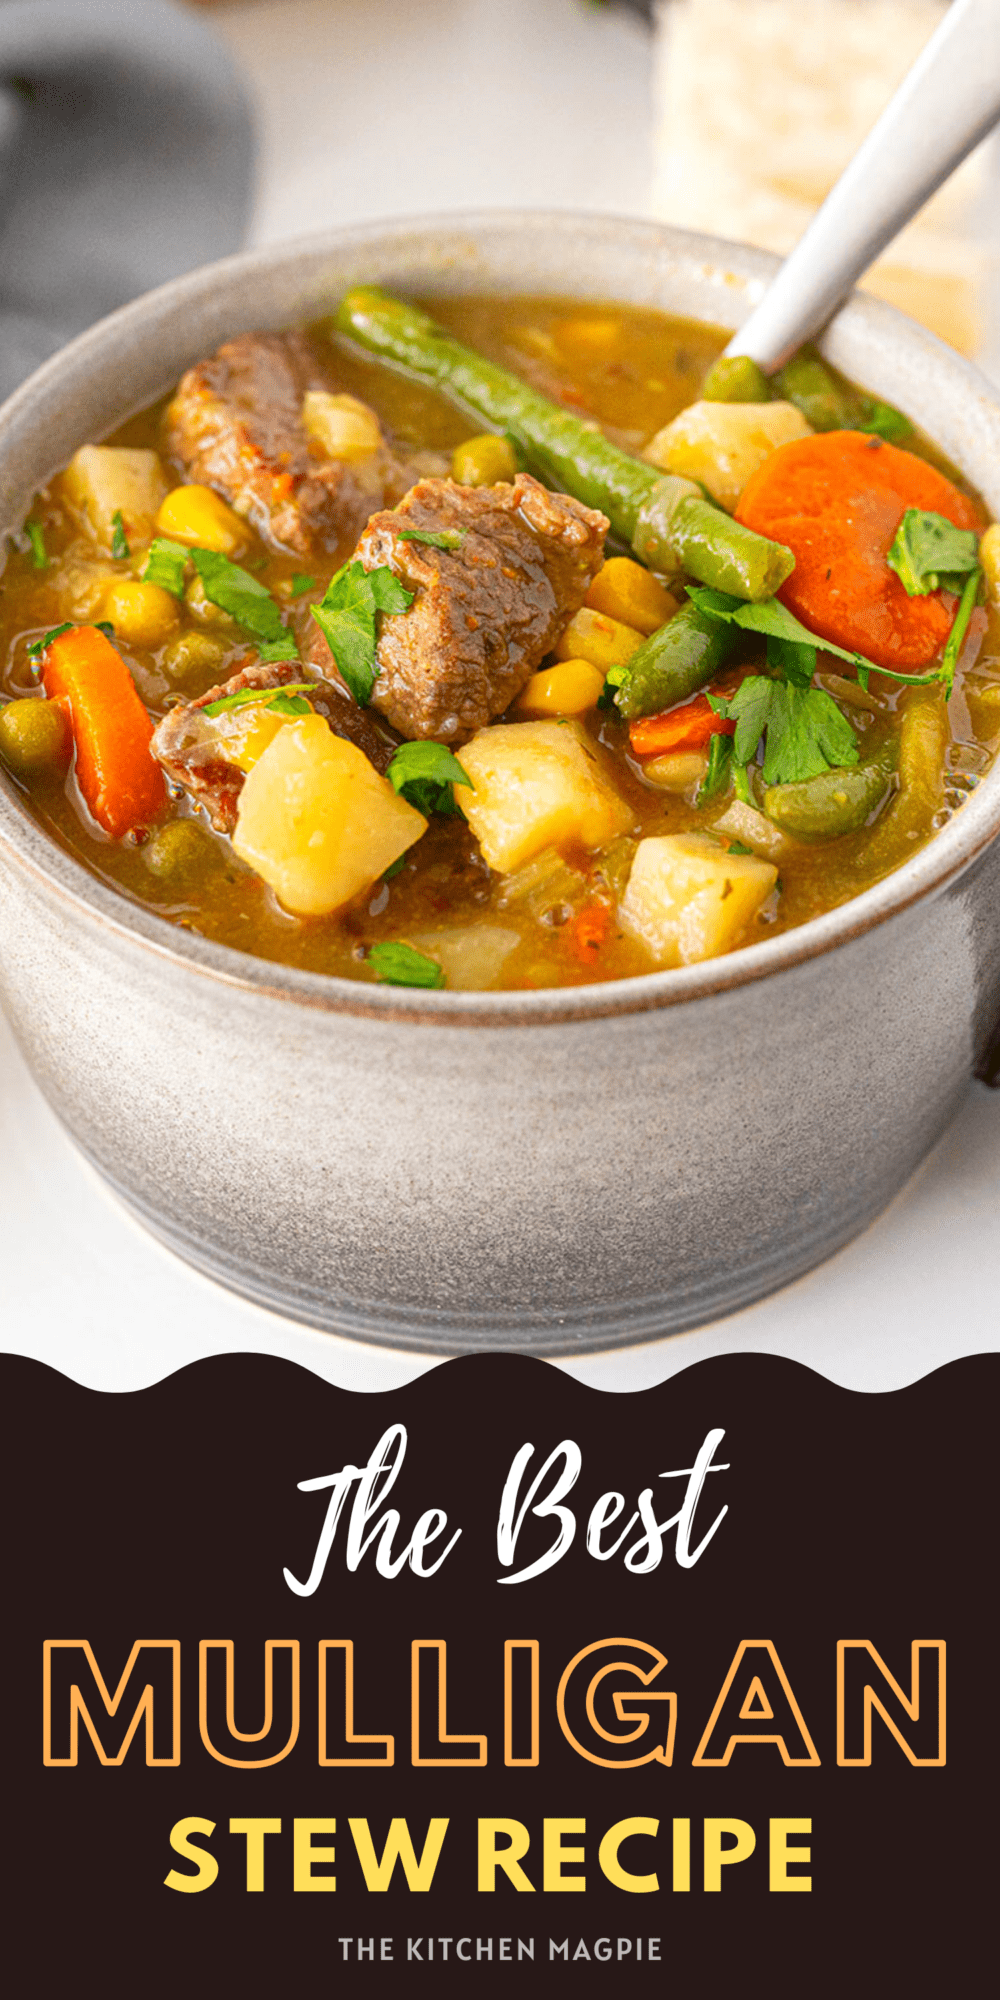 Rich, hearty Mulligan stew is a fast family dinner using what's in your fridge! It's loaded with beef and whatever vegetables you want!